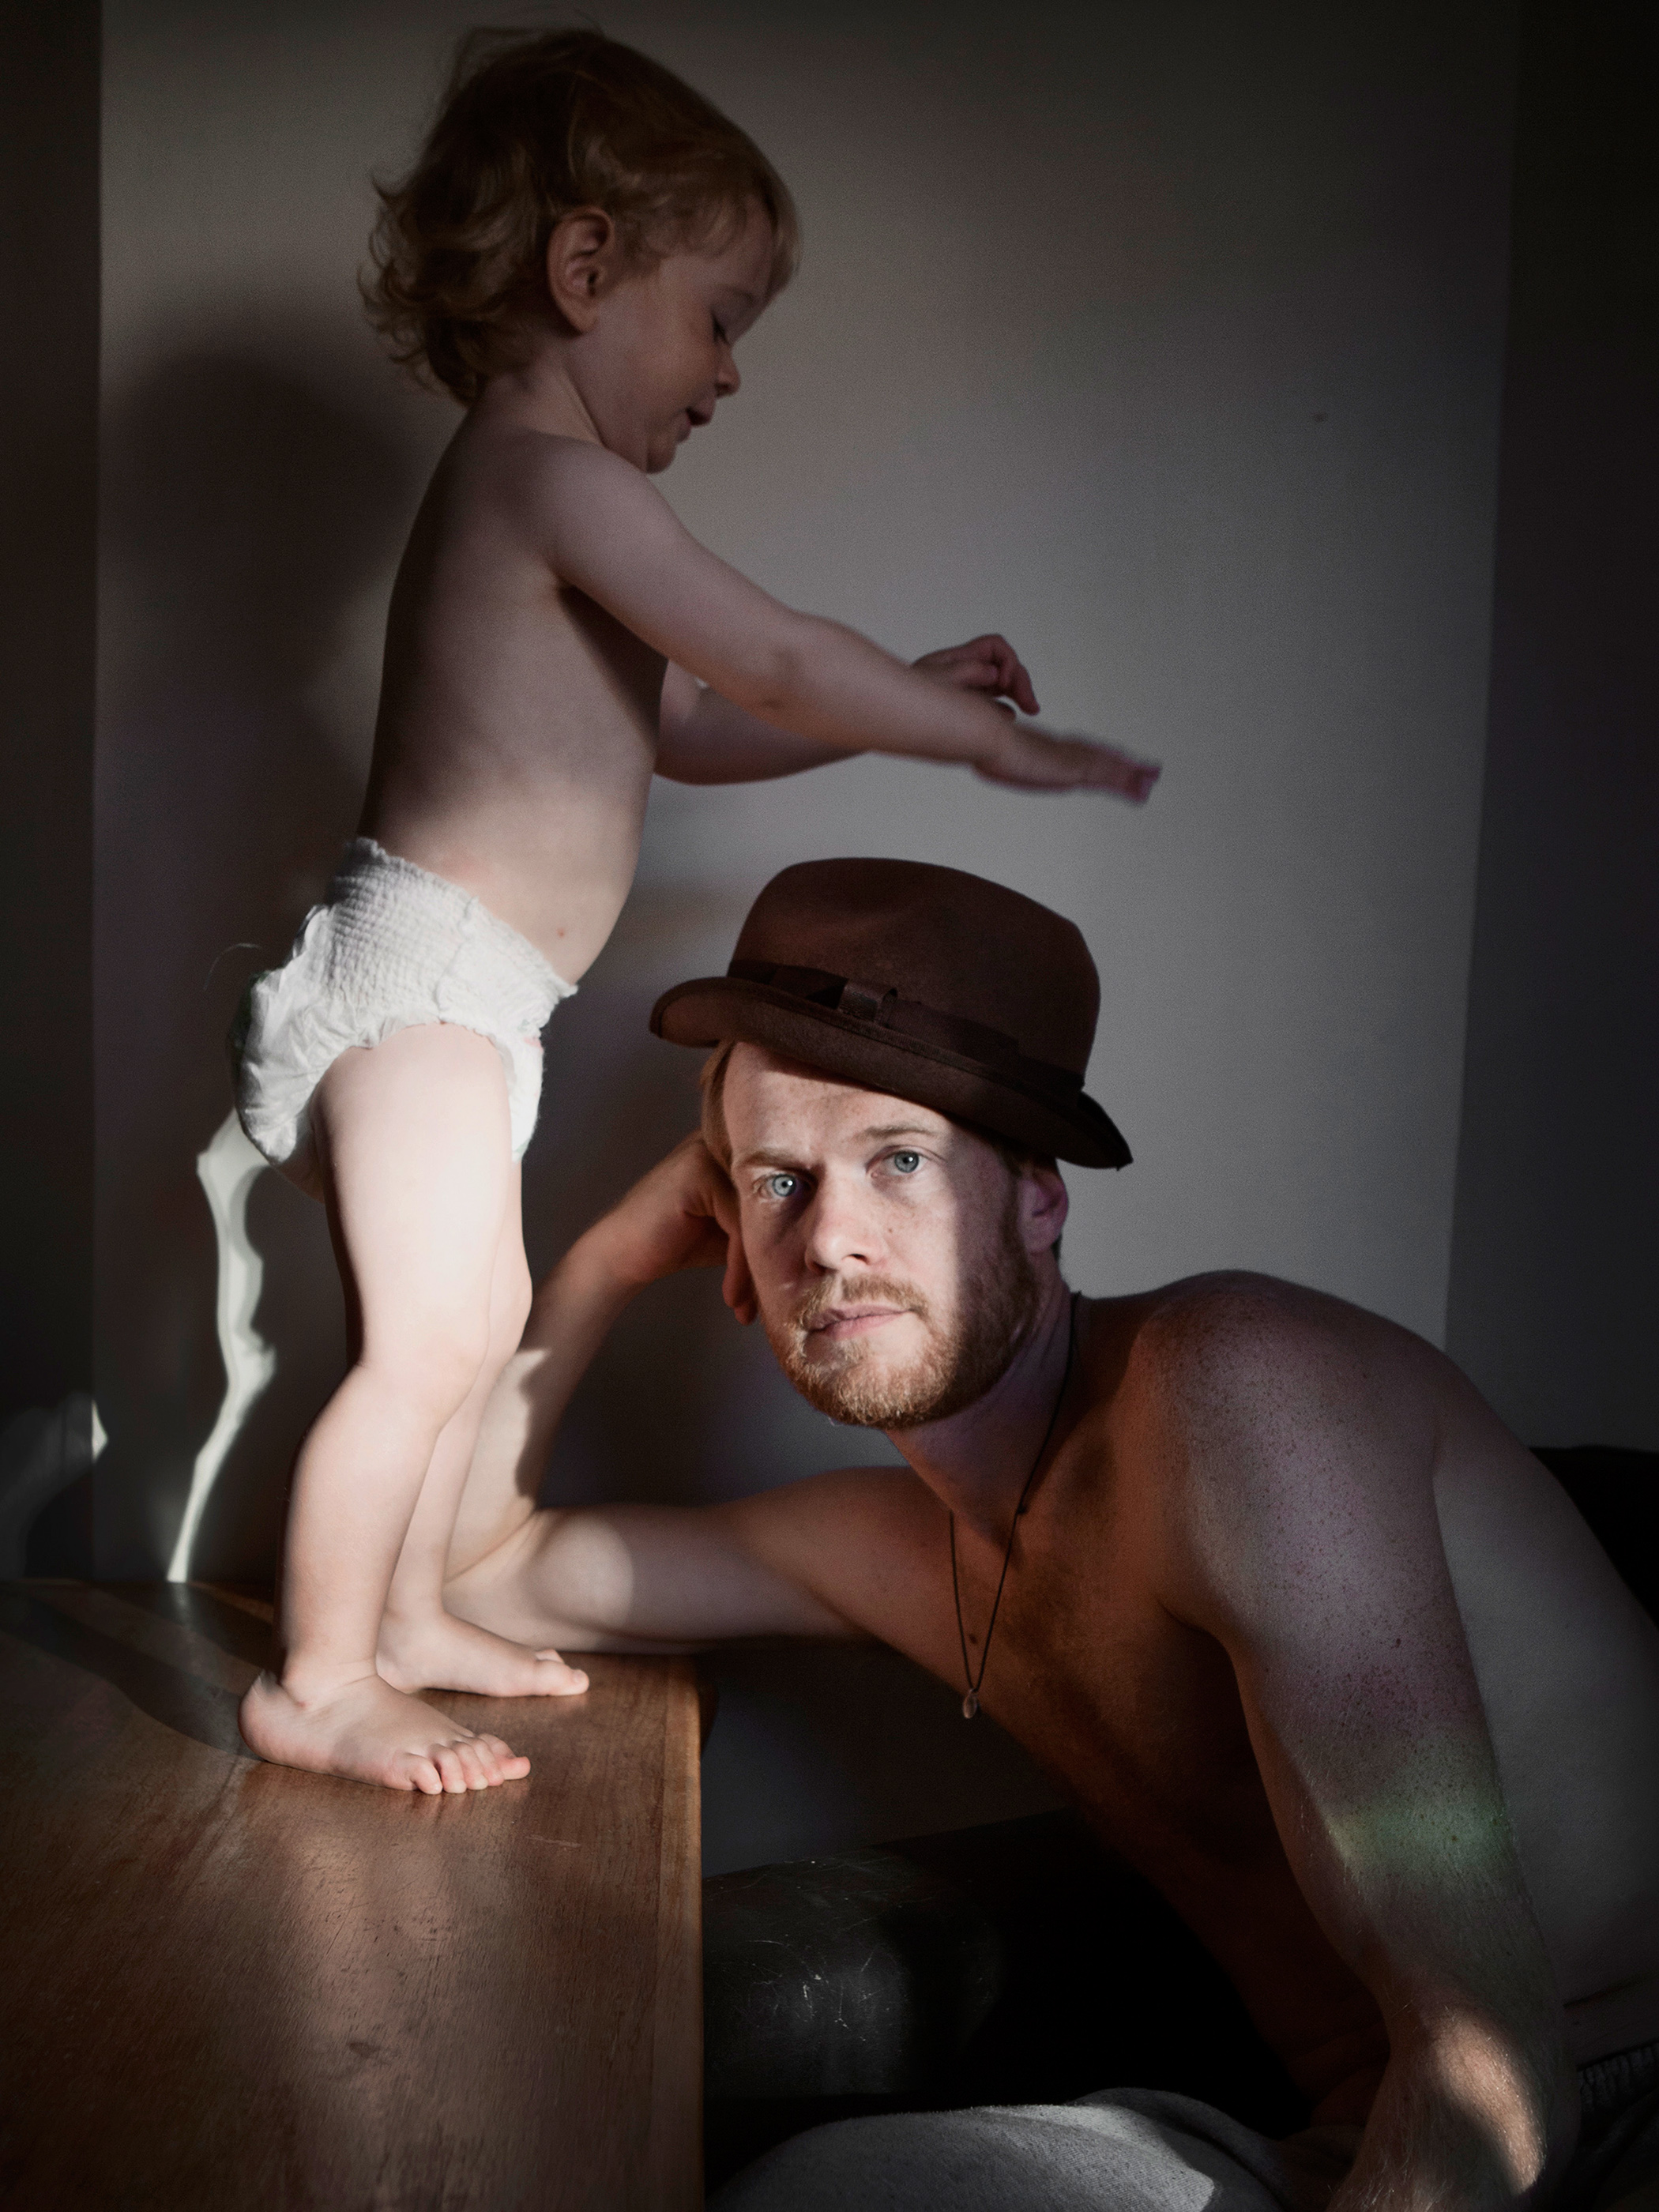 JOHAN BÄVMAN, 33, freelance photographer, with his son, Viggo. <b>Parental Leave:</b> Nine months. "I have an obligation as a father to take responsibility for my children and their safety and upbringing, because I am as much a parent as my son's mother."
                                            
                                            